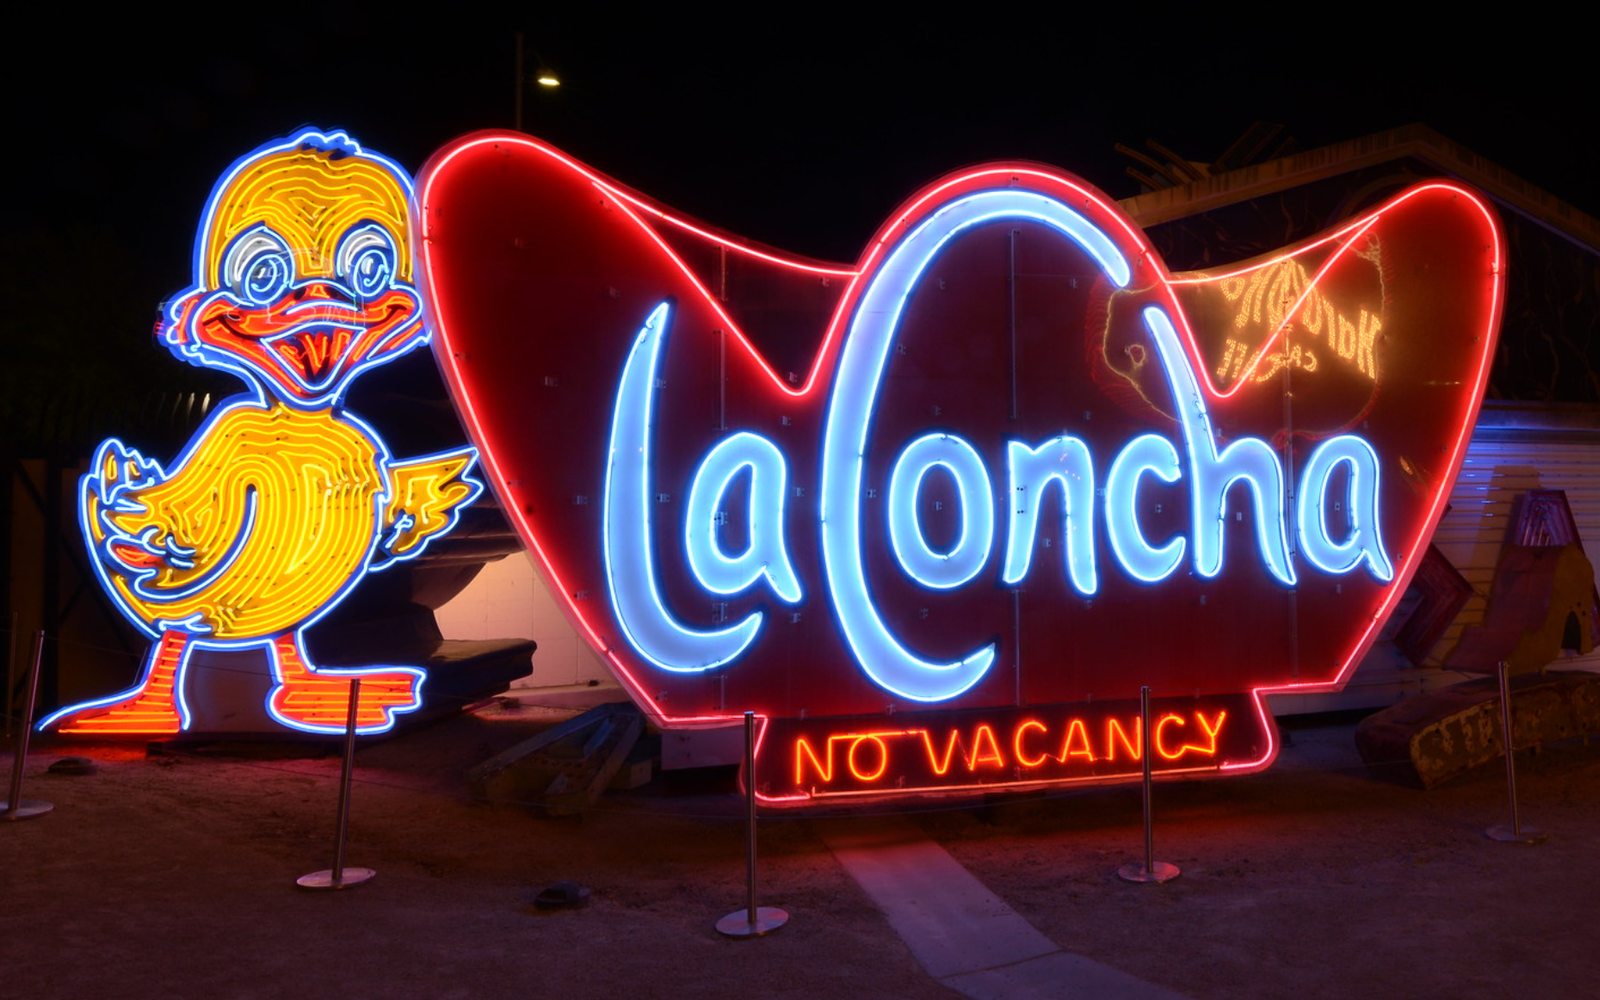 The Ugly Duckling and La Concha sign at the Neon Boneyard who are a part of The Neon Museum sign collection.